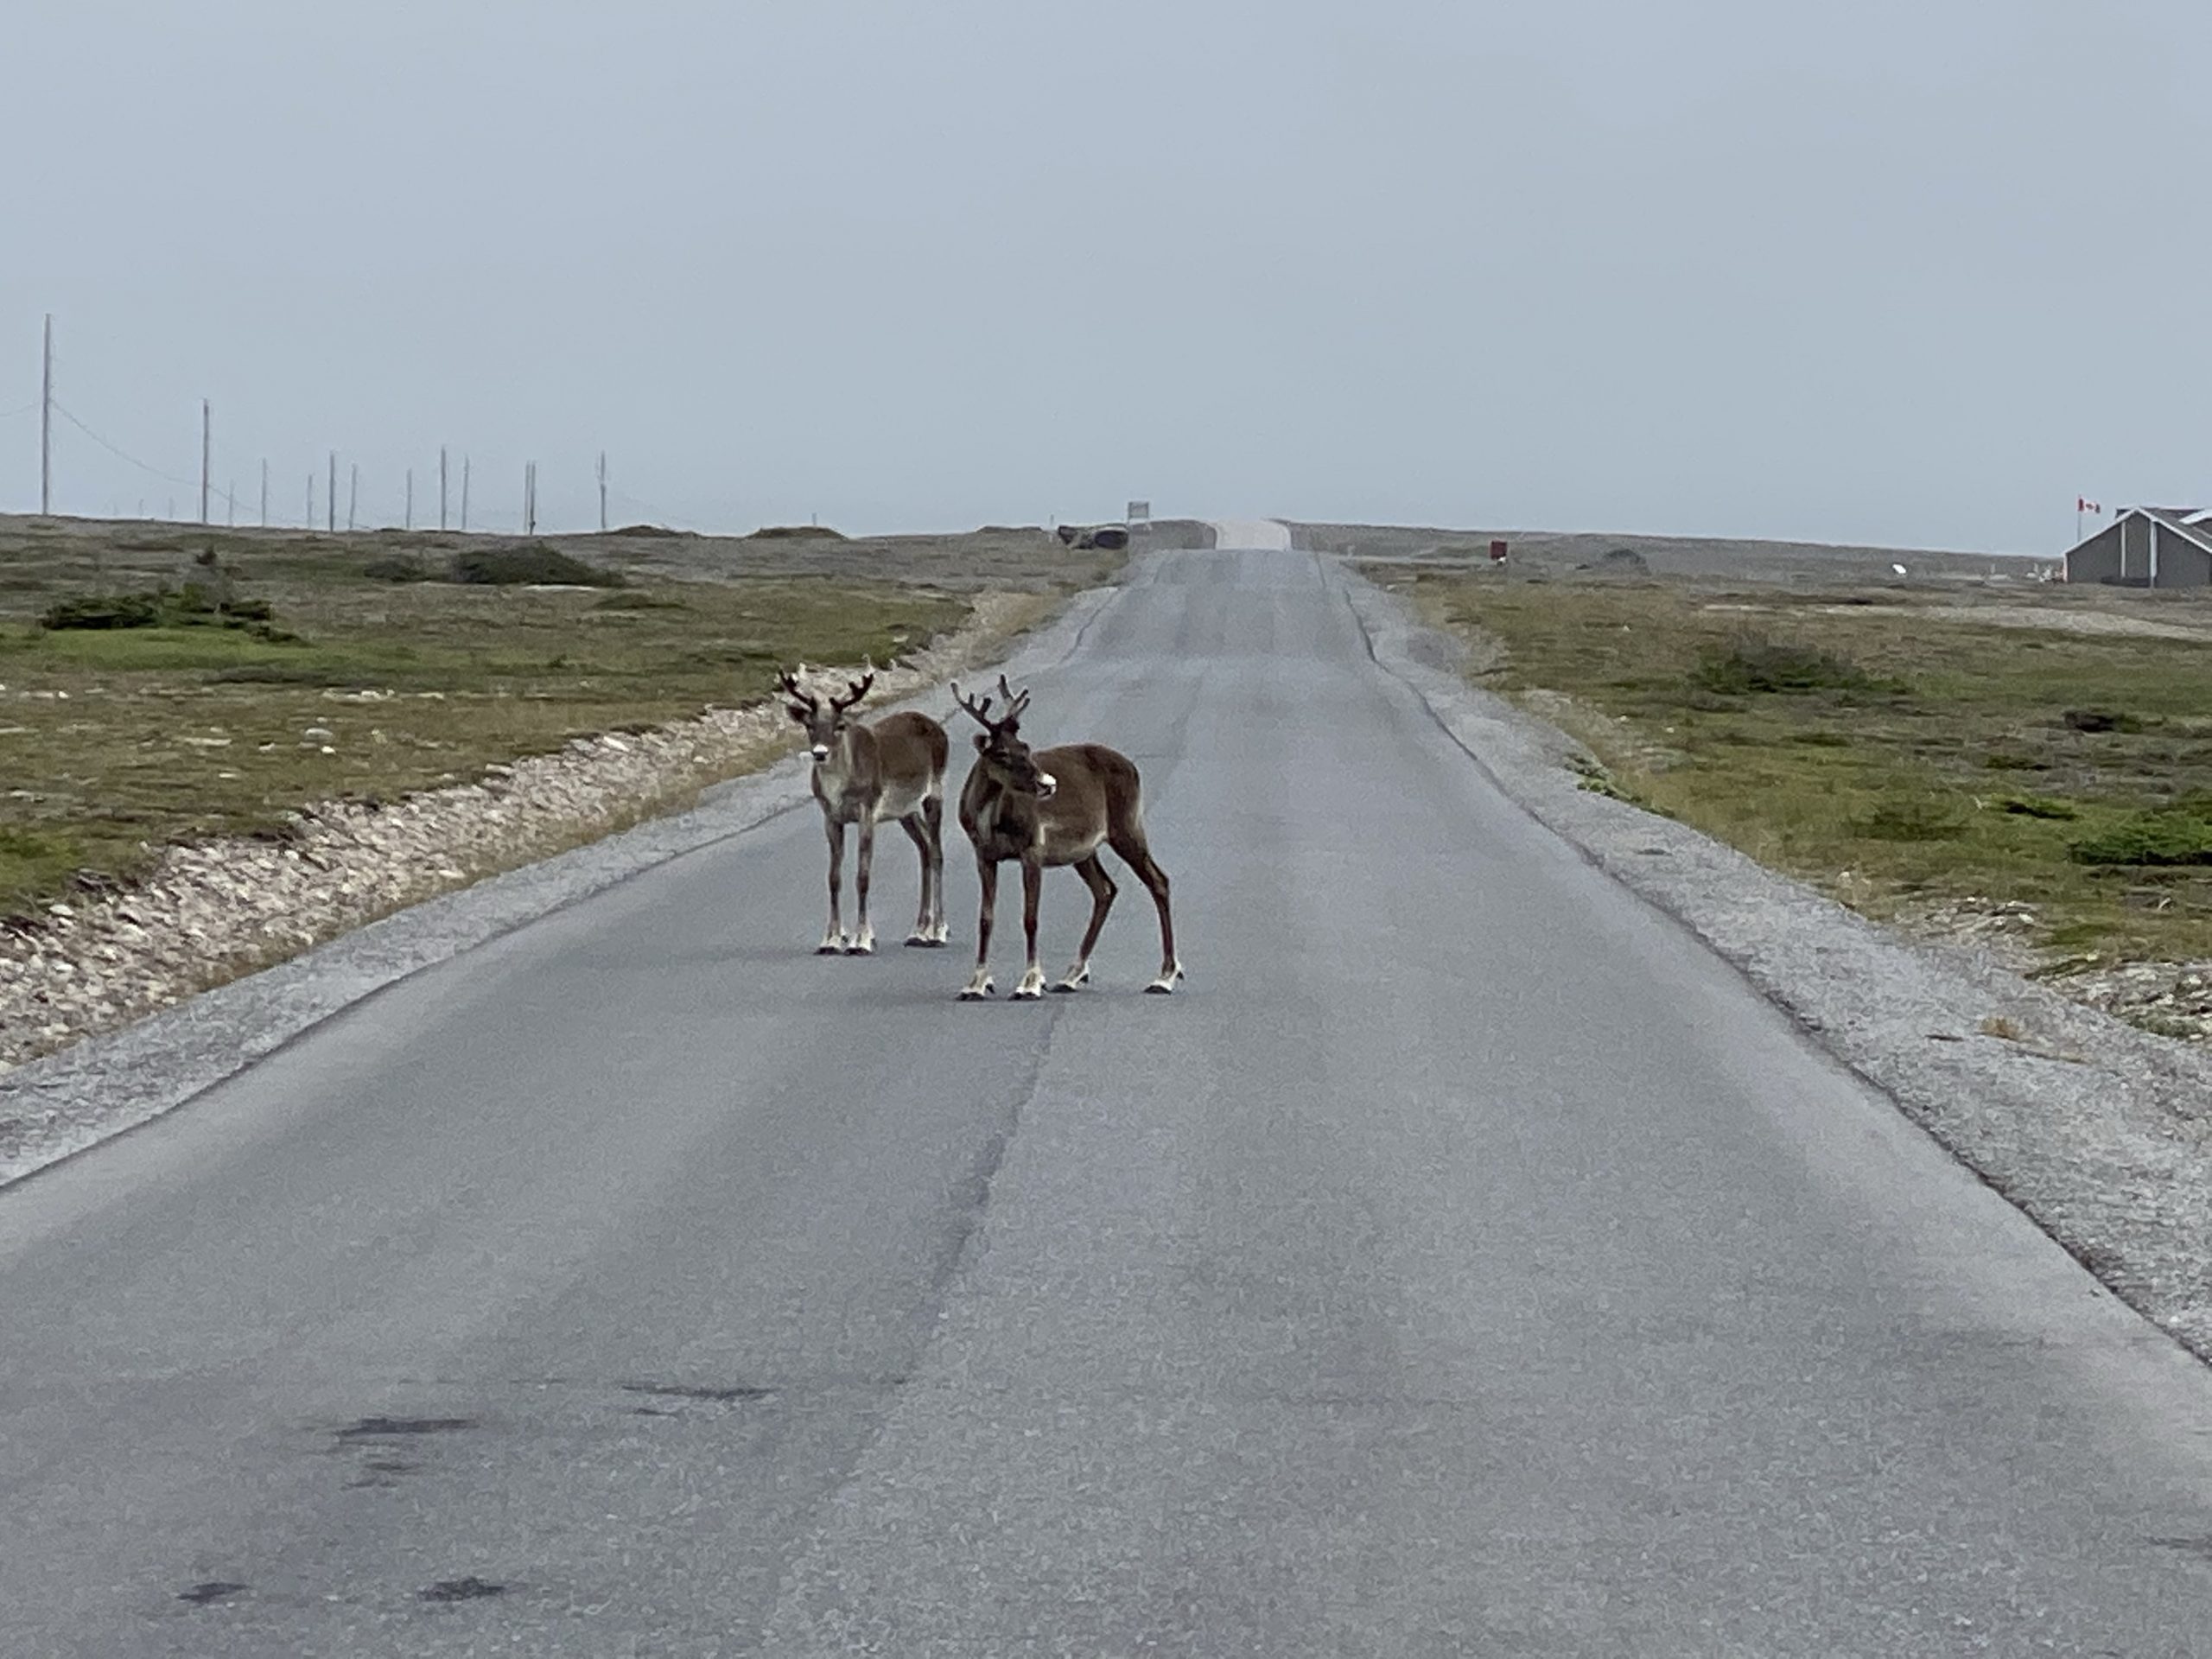 A couple of caribou loiter in the road near Port Choix, Newfoundland.